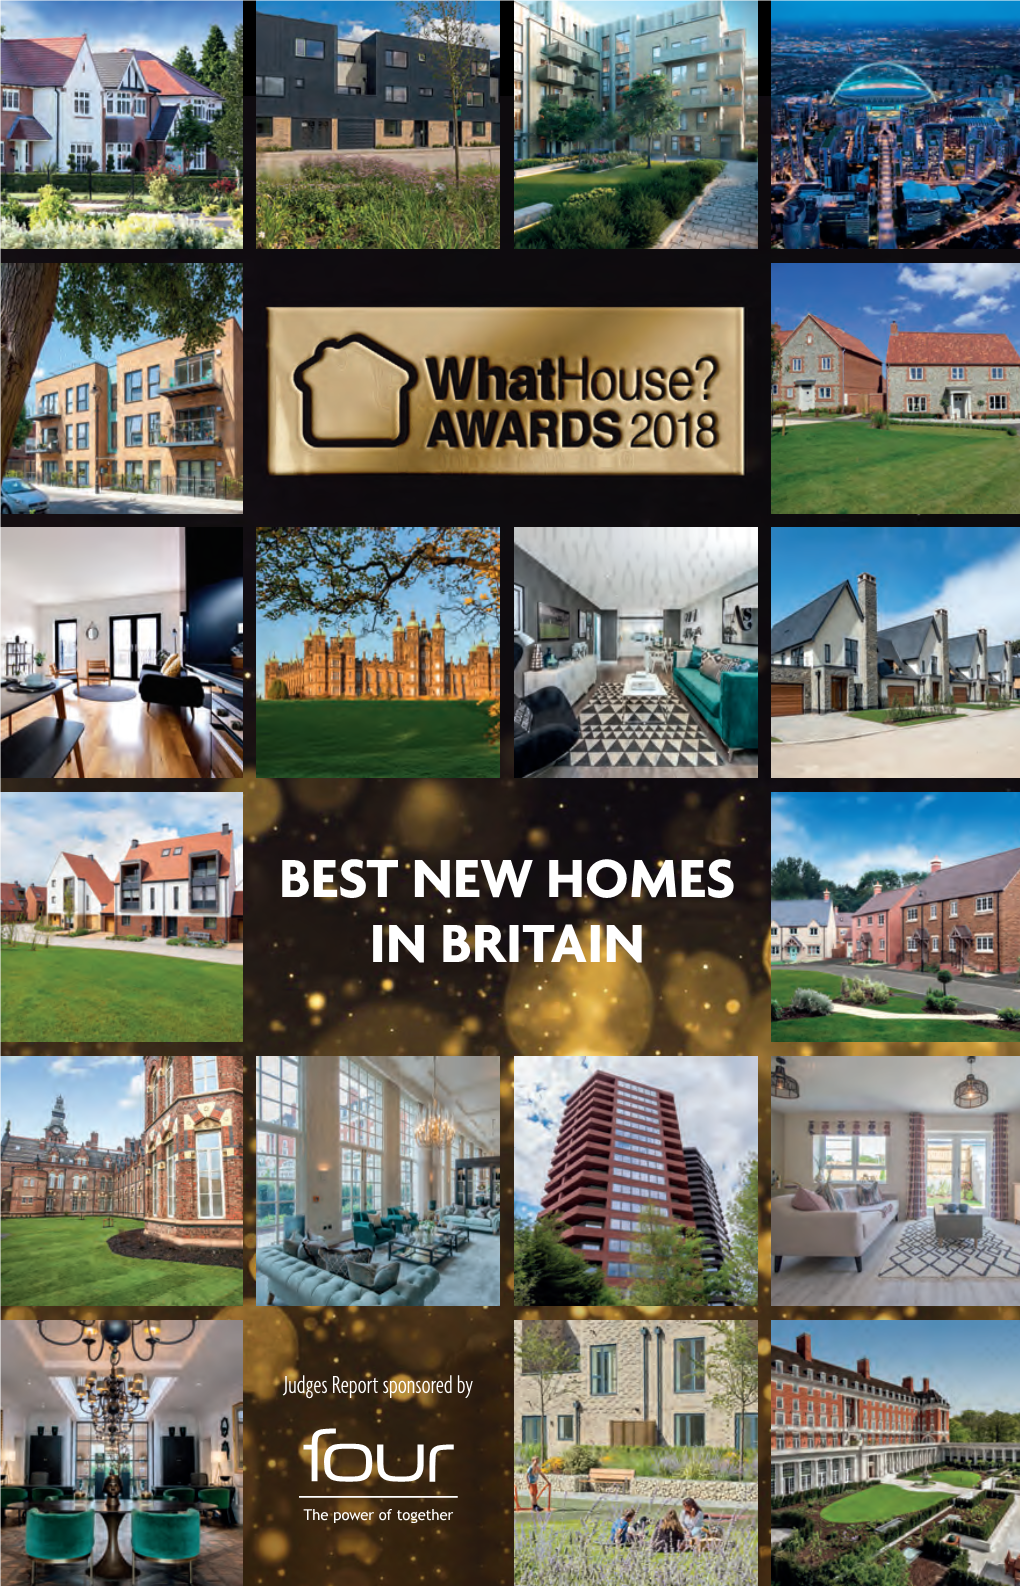 Best New Homes in Britain